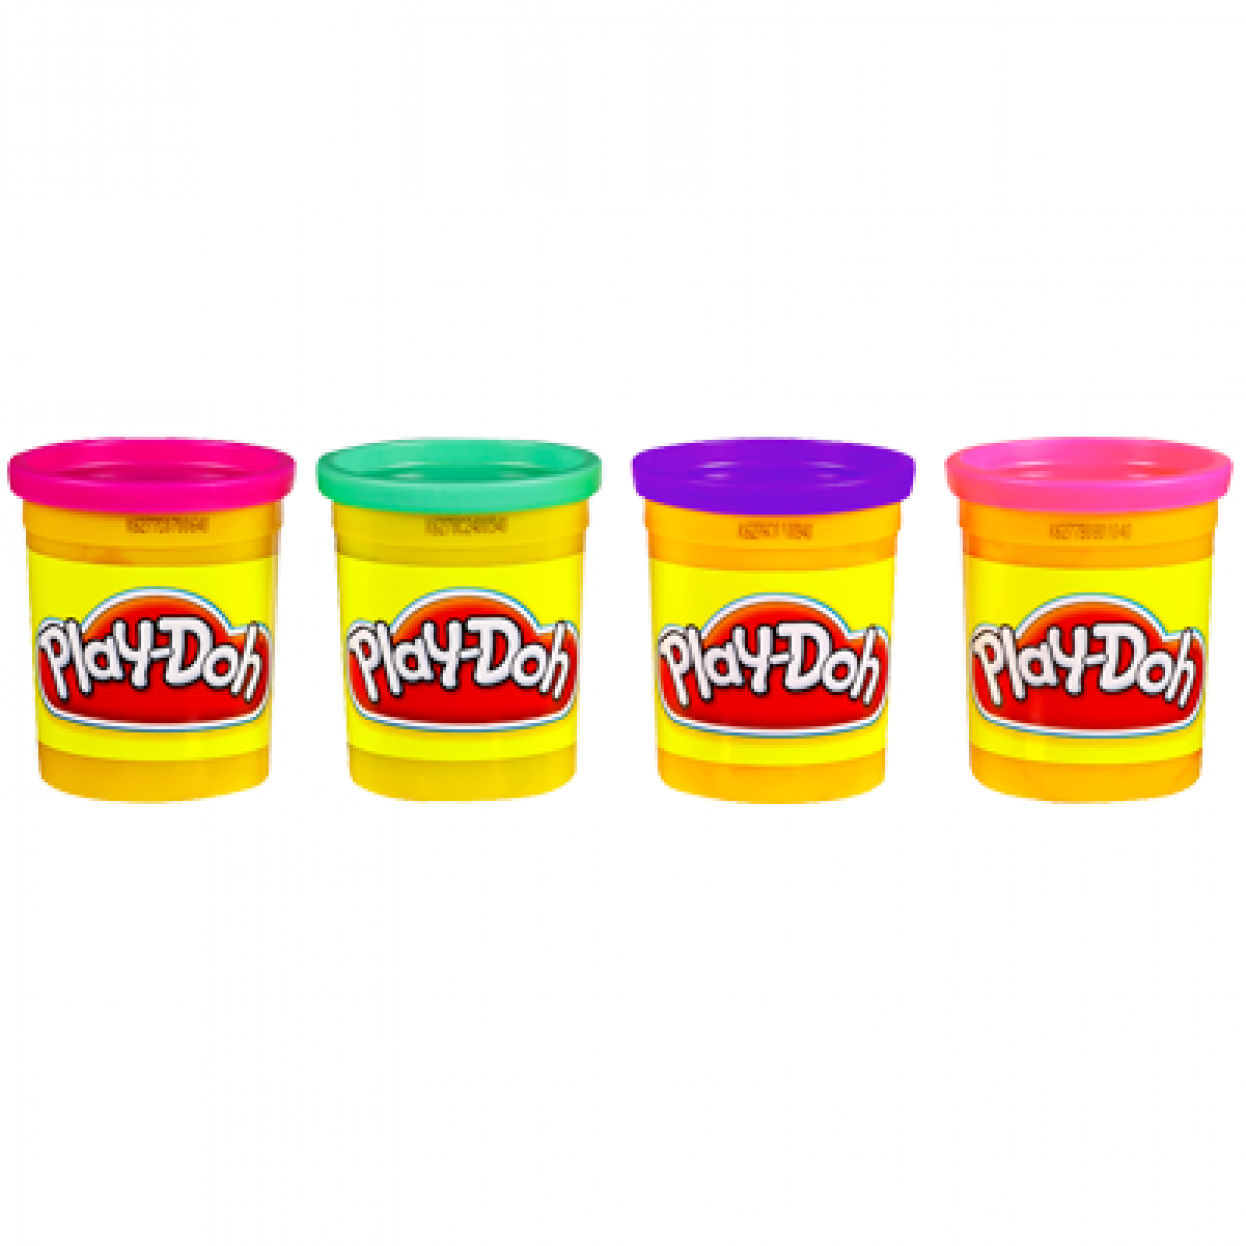 A Group Of Colorful Play Doh Containers